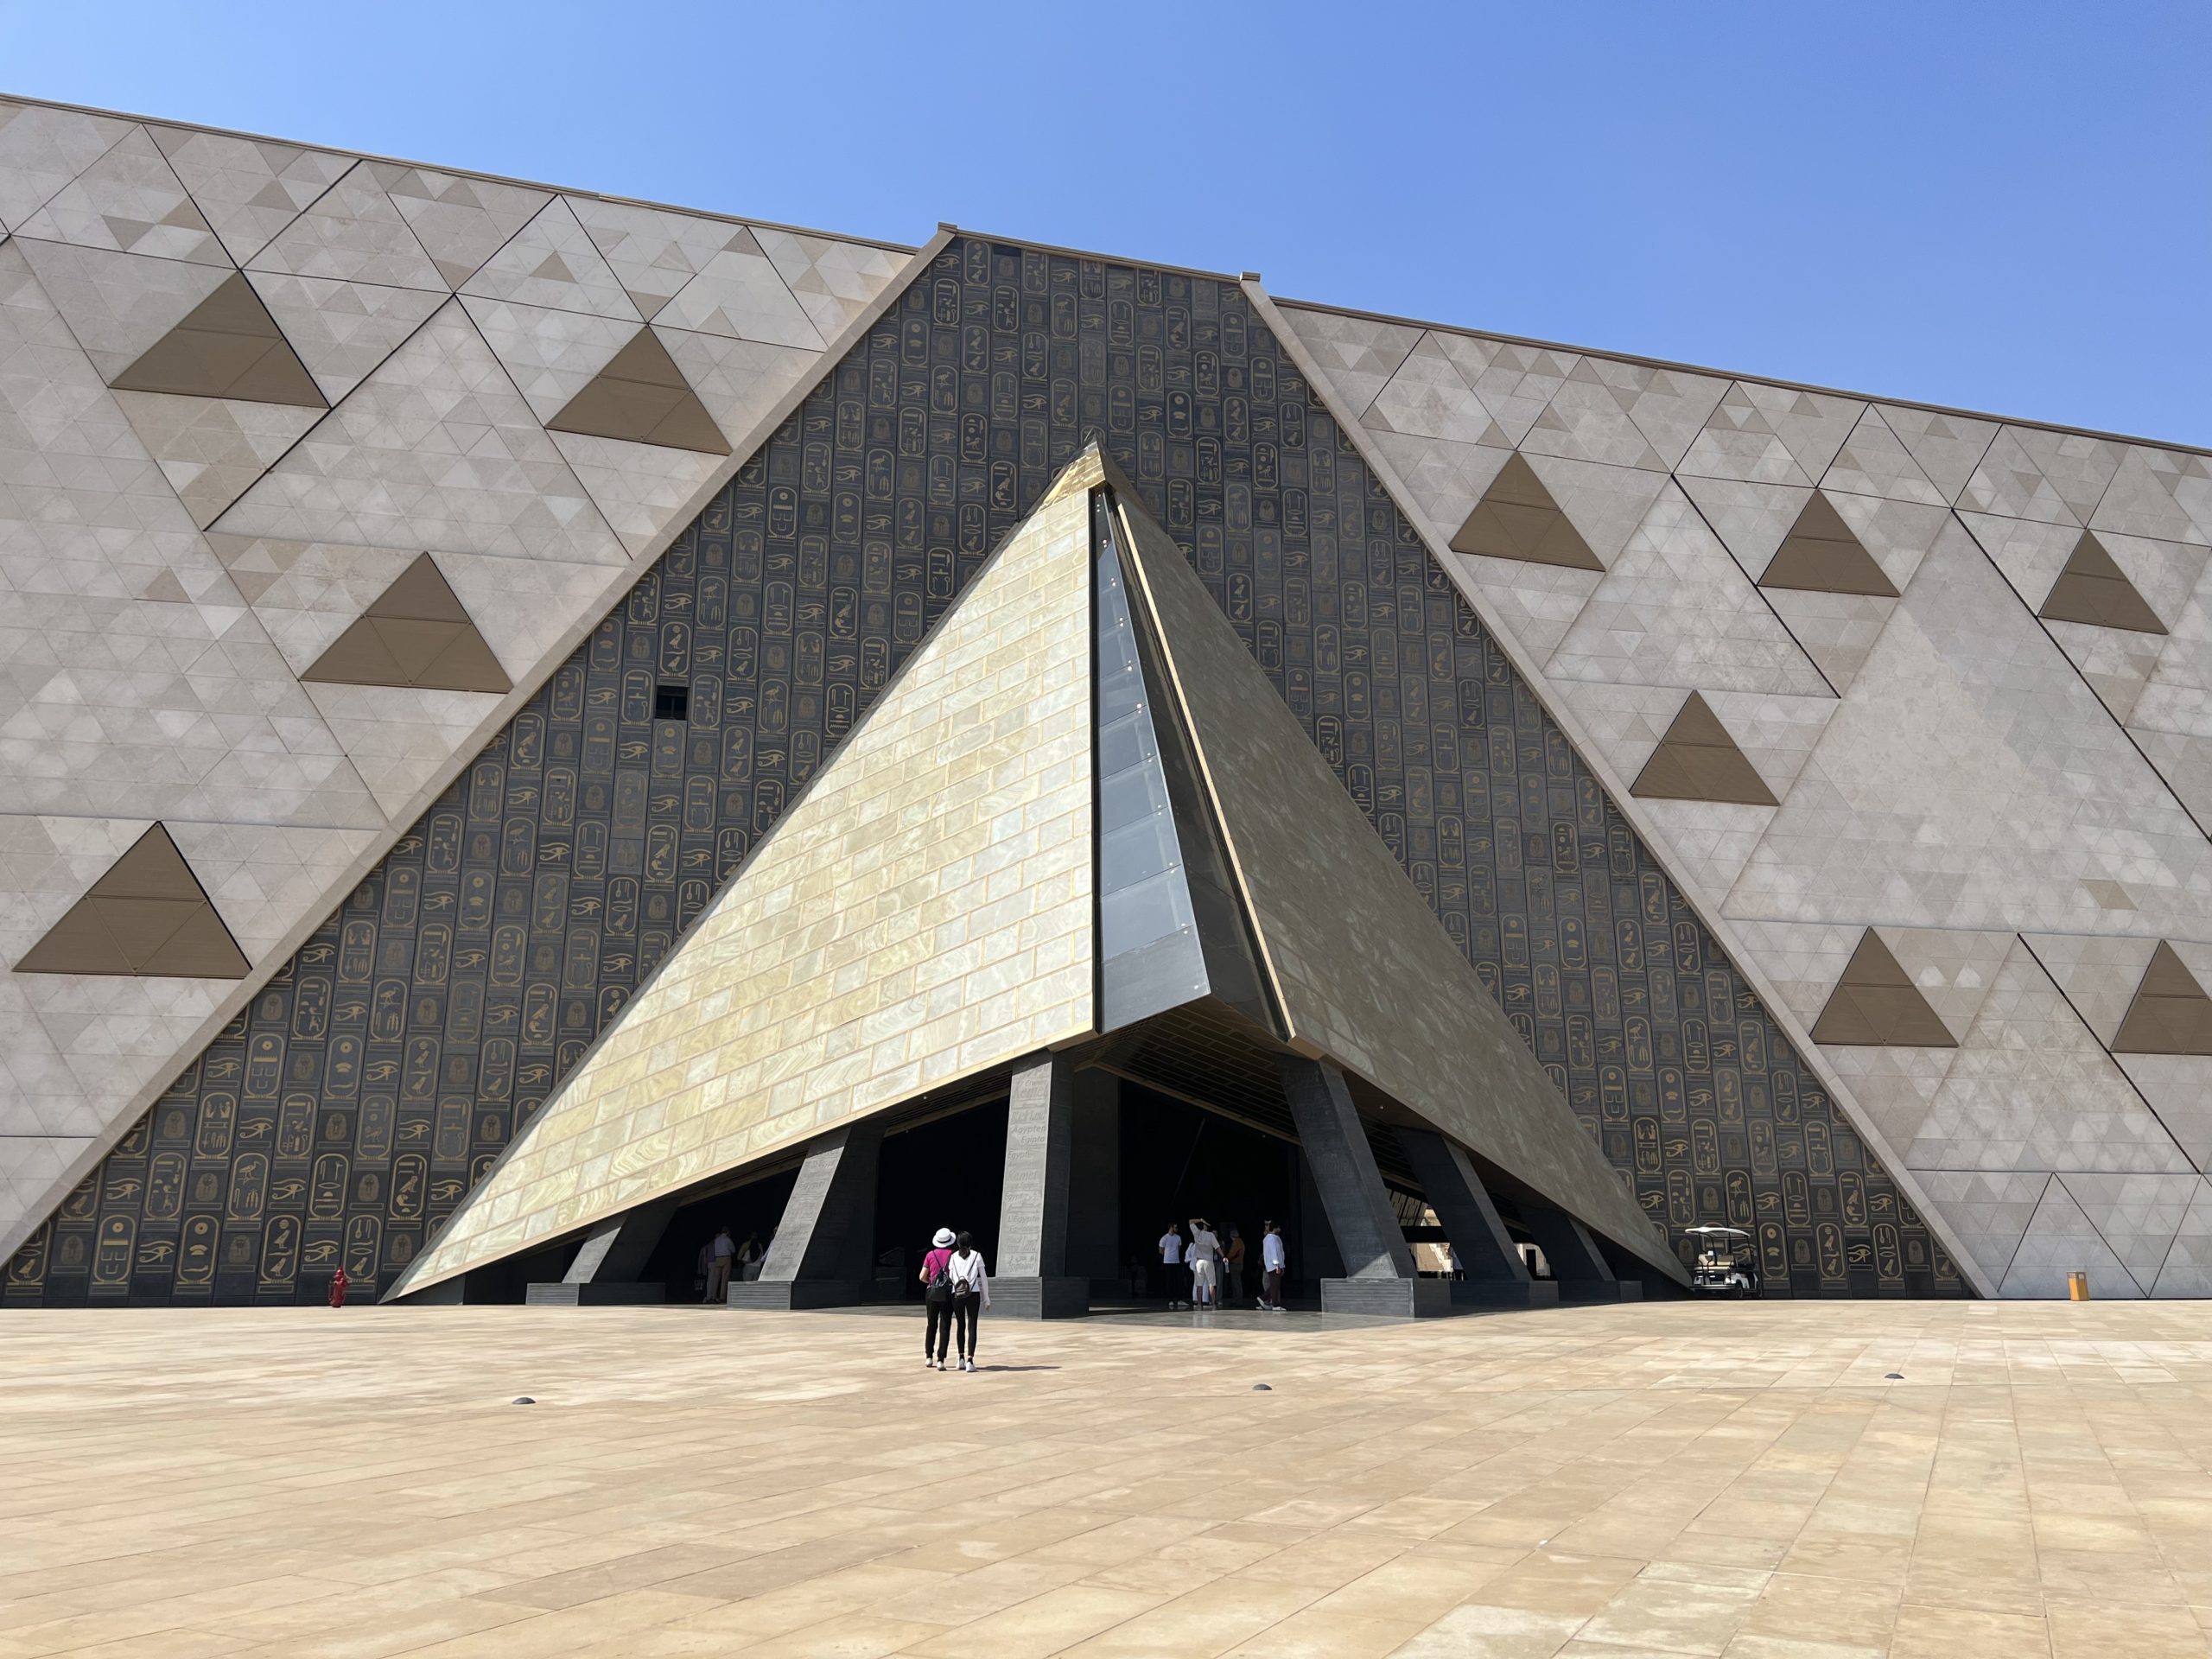 The Grand Egyptian Museum entrance creates the illusion of walking into a pyramid